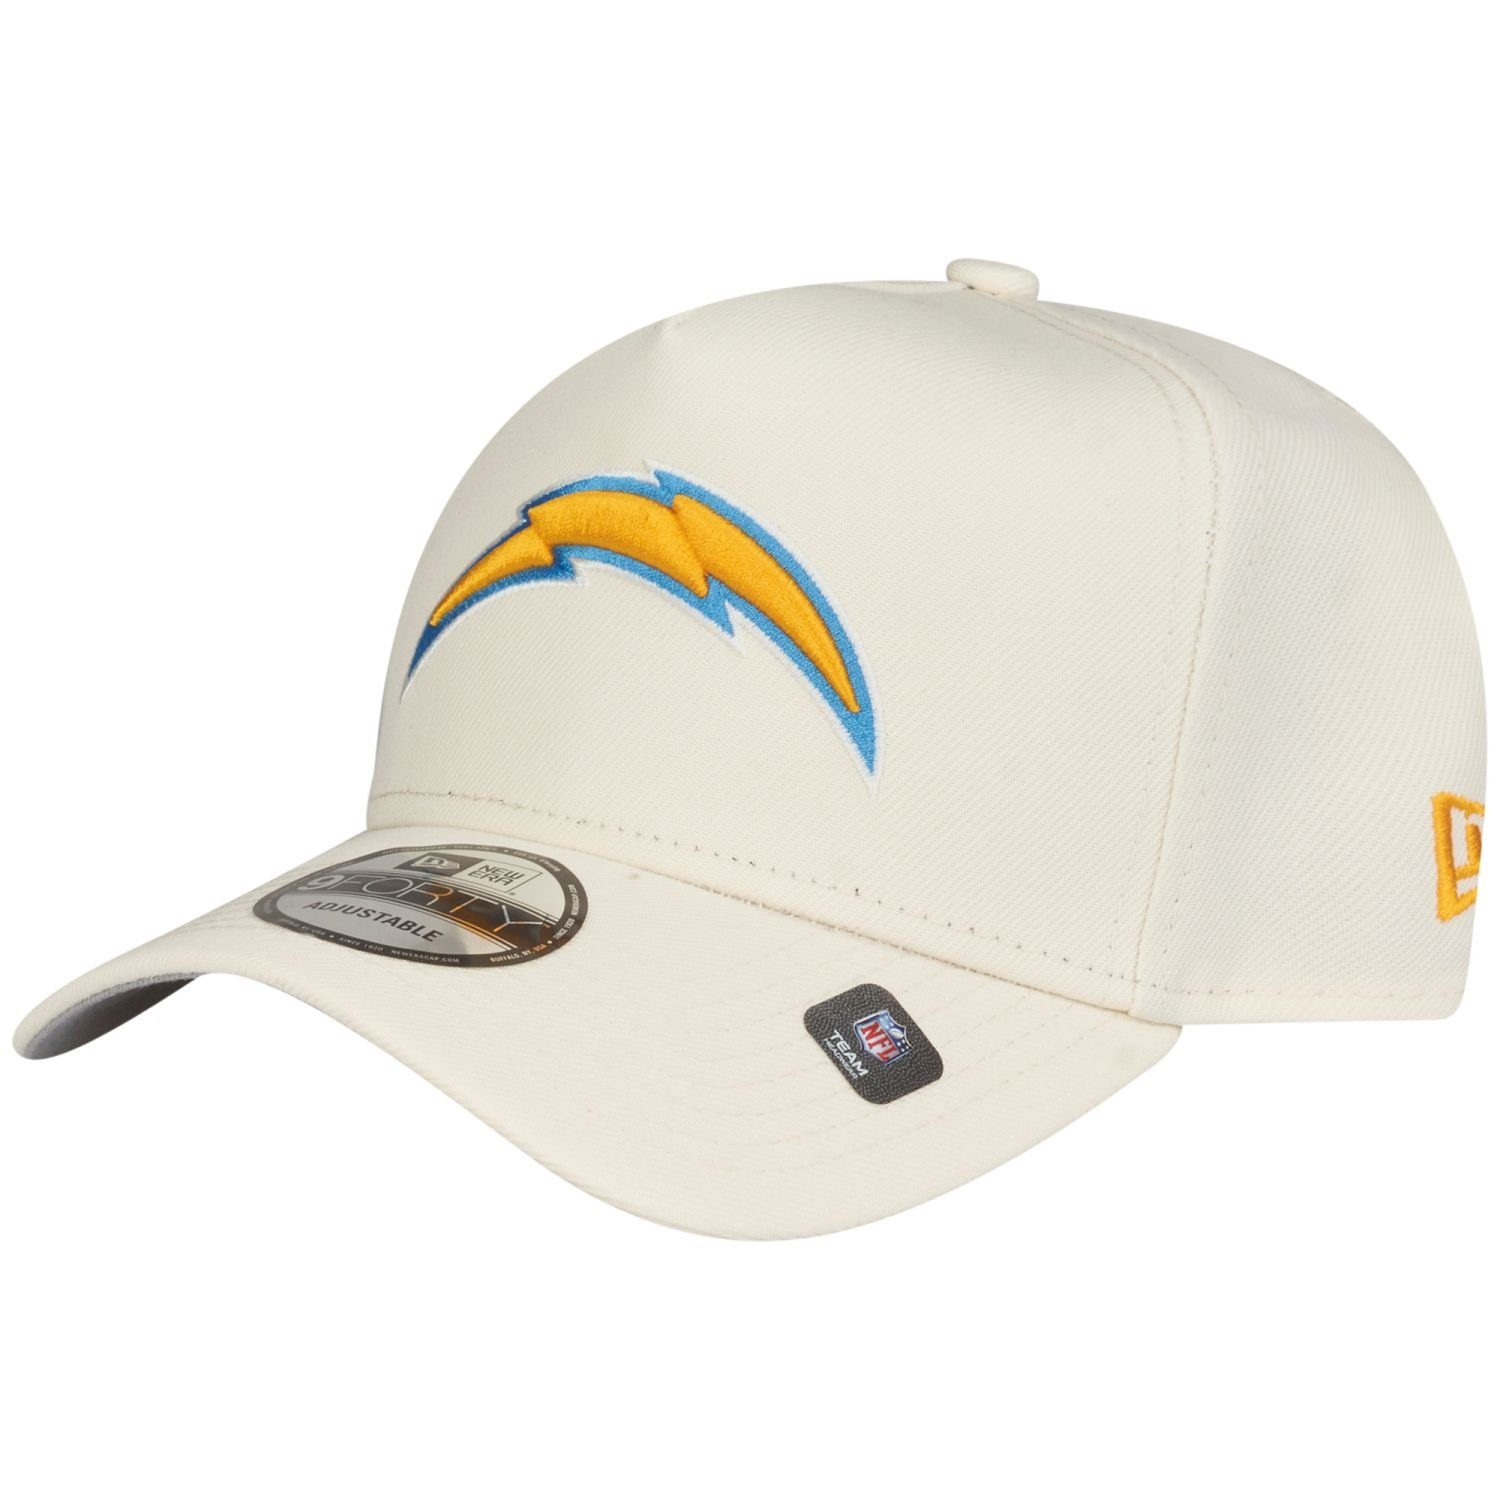 New Era Trucker Cap 9Forty AFrame Trucker NFL TEAMS chrome white Los Angeles Chargers